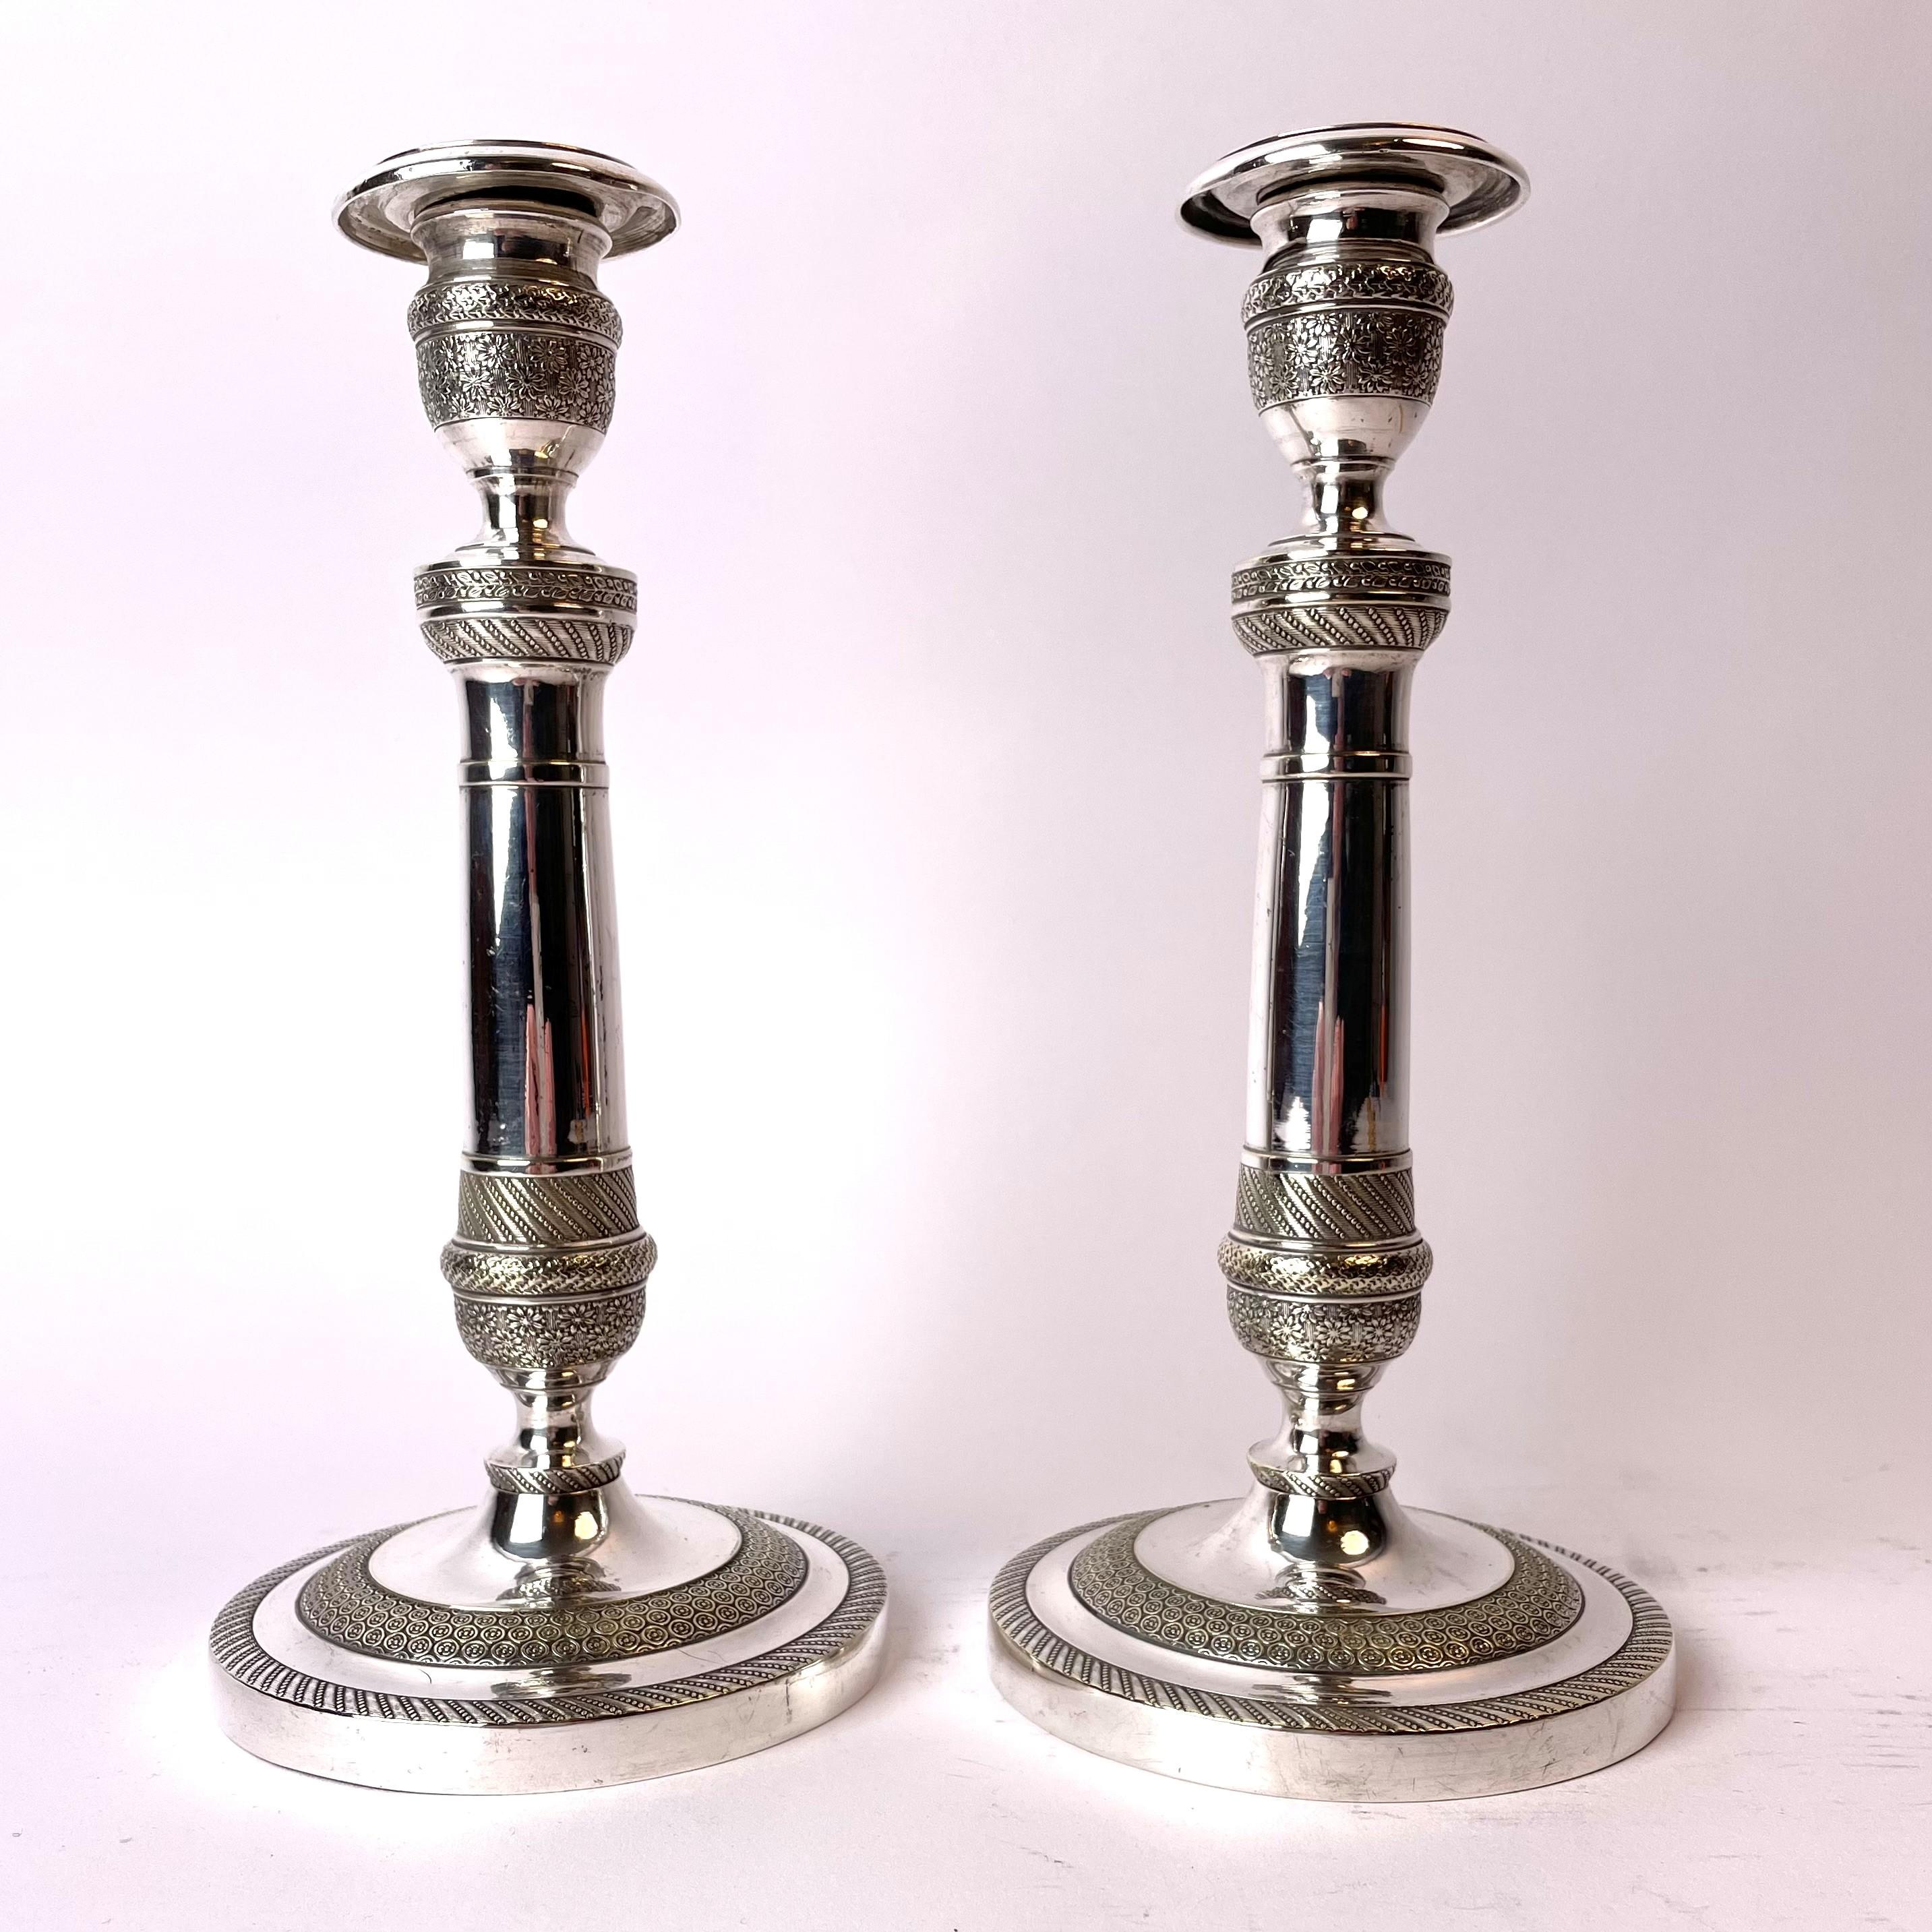 An Elegant pair of candlesticks in Argent haché. French Empire, early 19th Century. Beautifully decorated (see pictures)


Wear consistent with age and use.